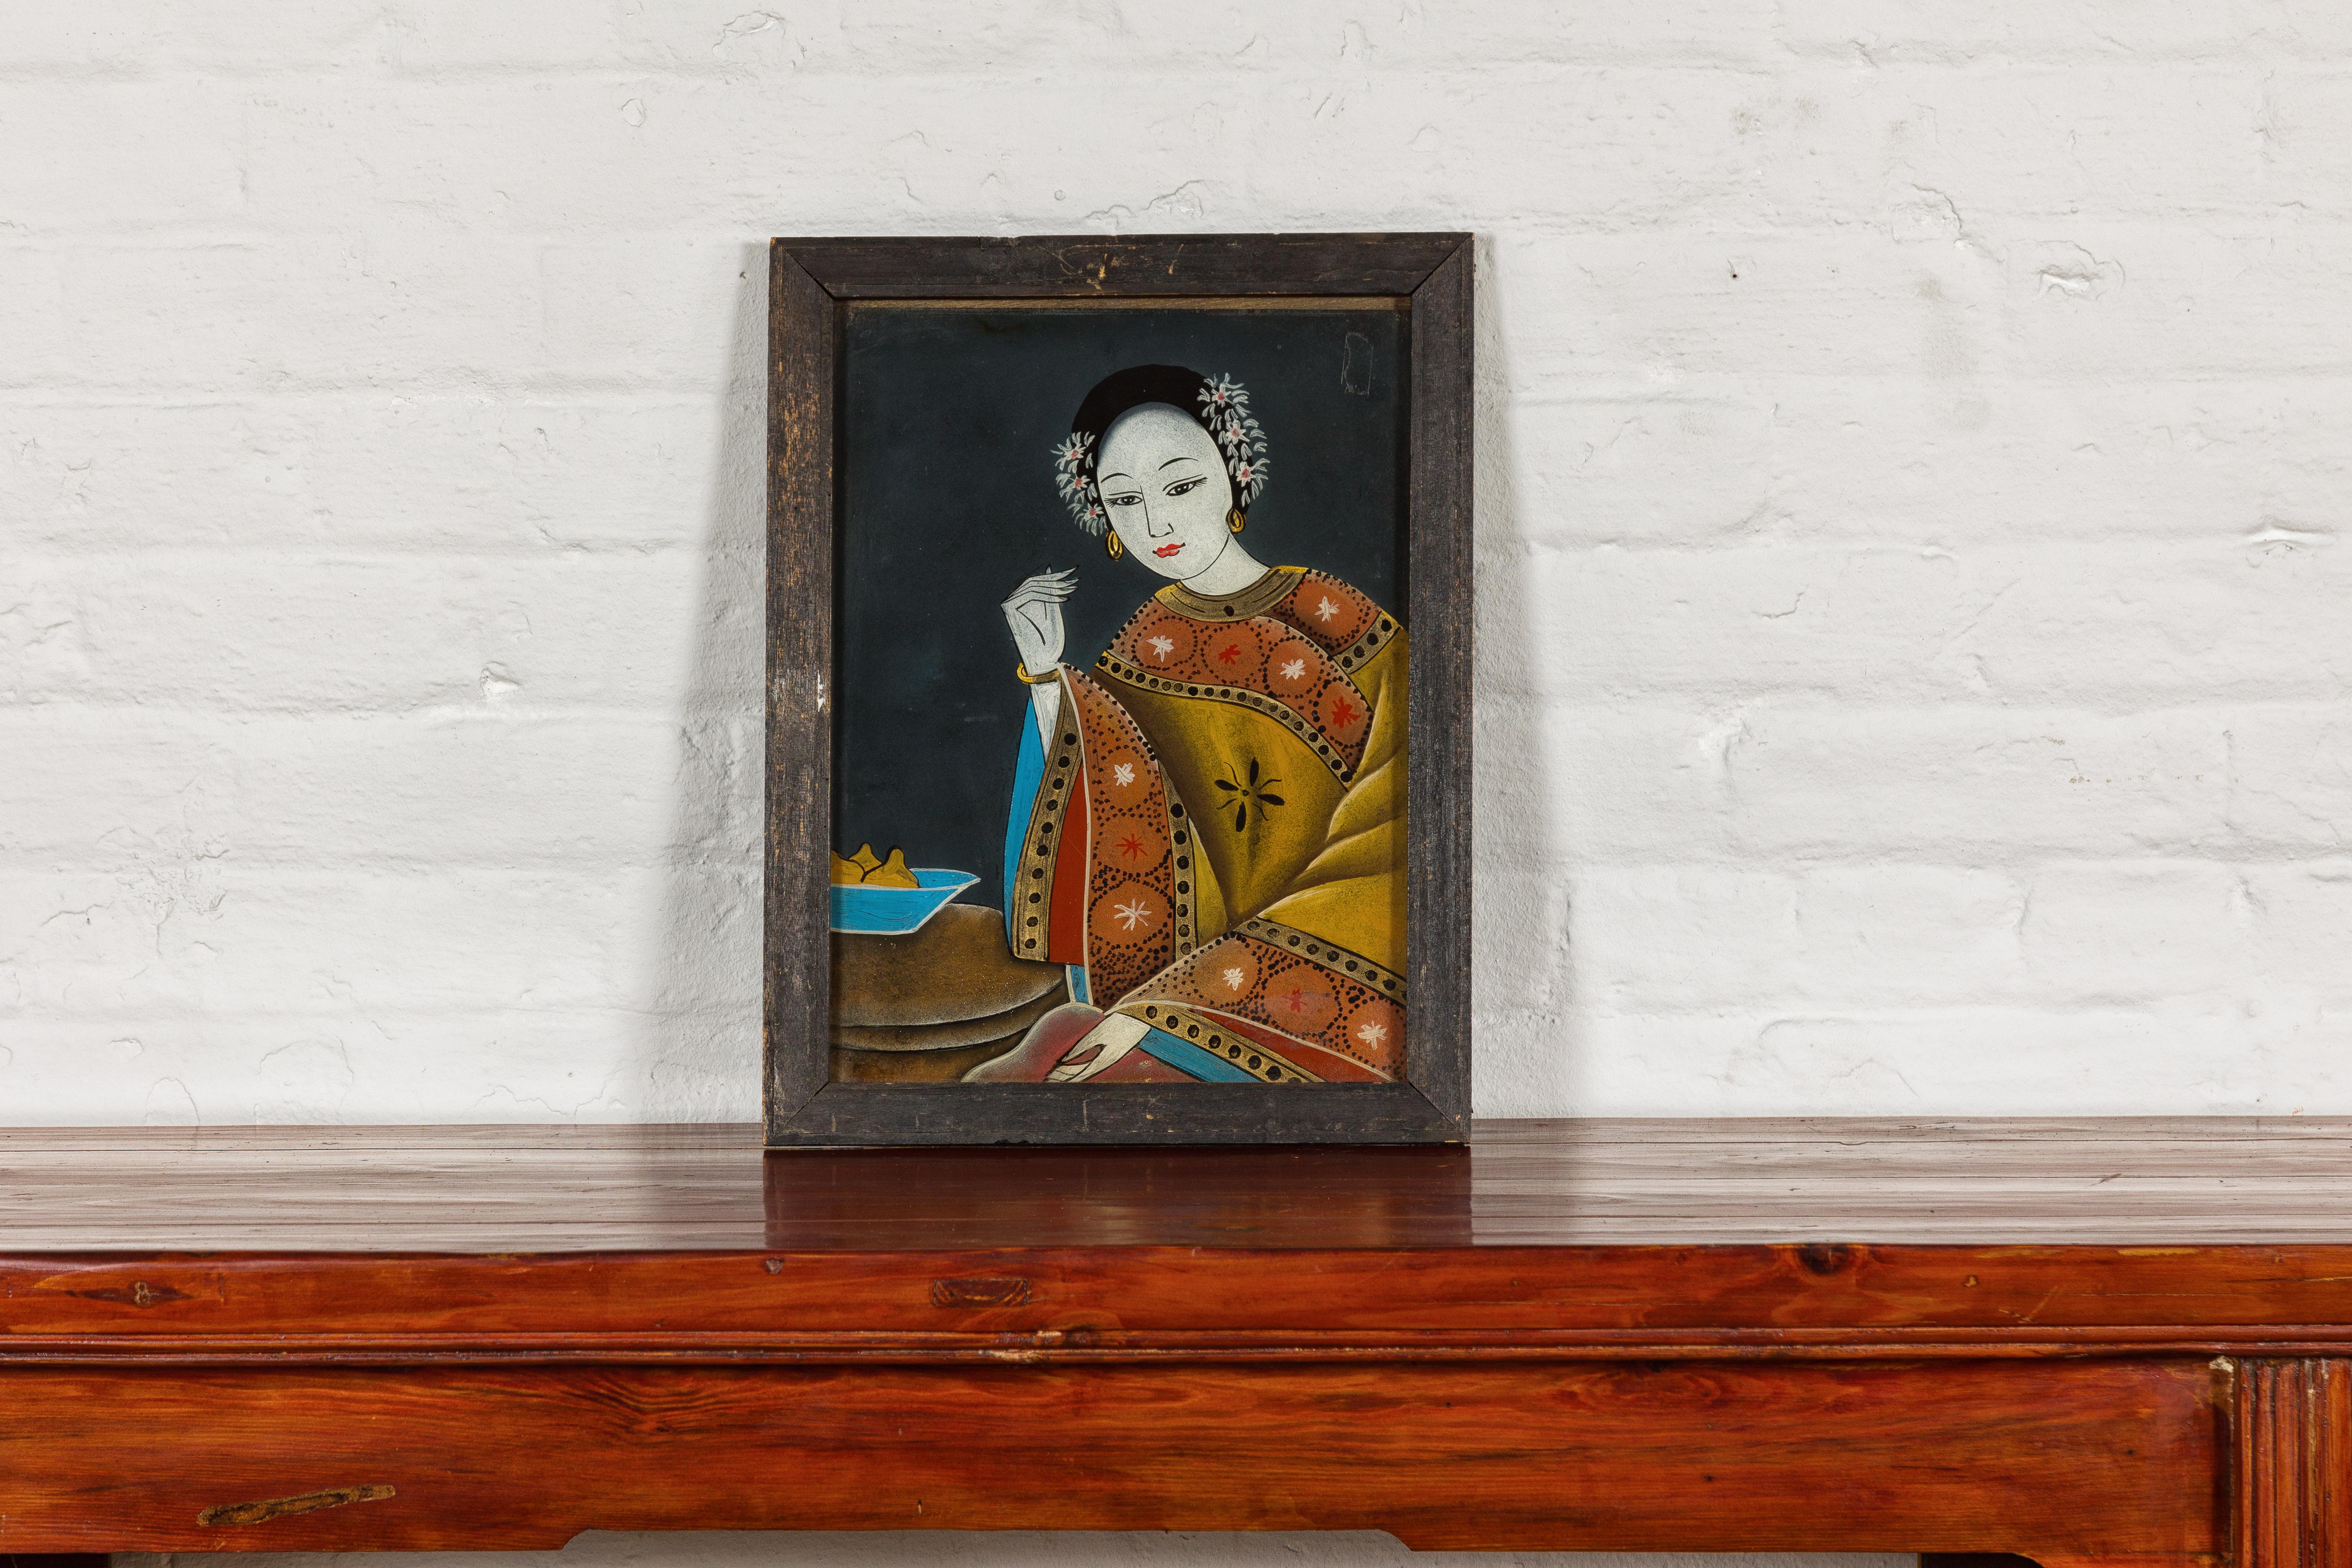 An antique Chinese reverse painting on glass from the early 20th century depicting a woman sitting next to a bowl of fruits. This exquisite early 20th-century Chinese reverse painting on glass captures a serene and contemplative moment, depicting a